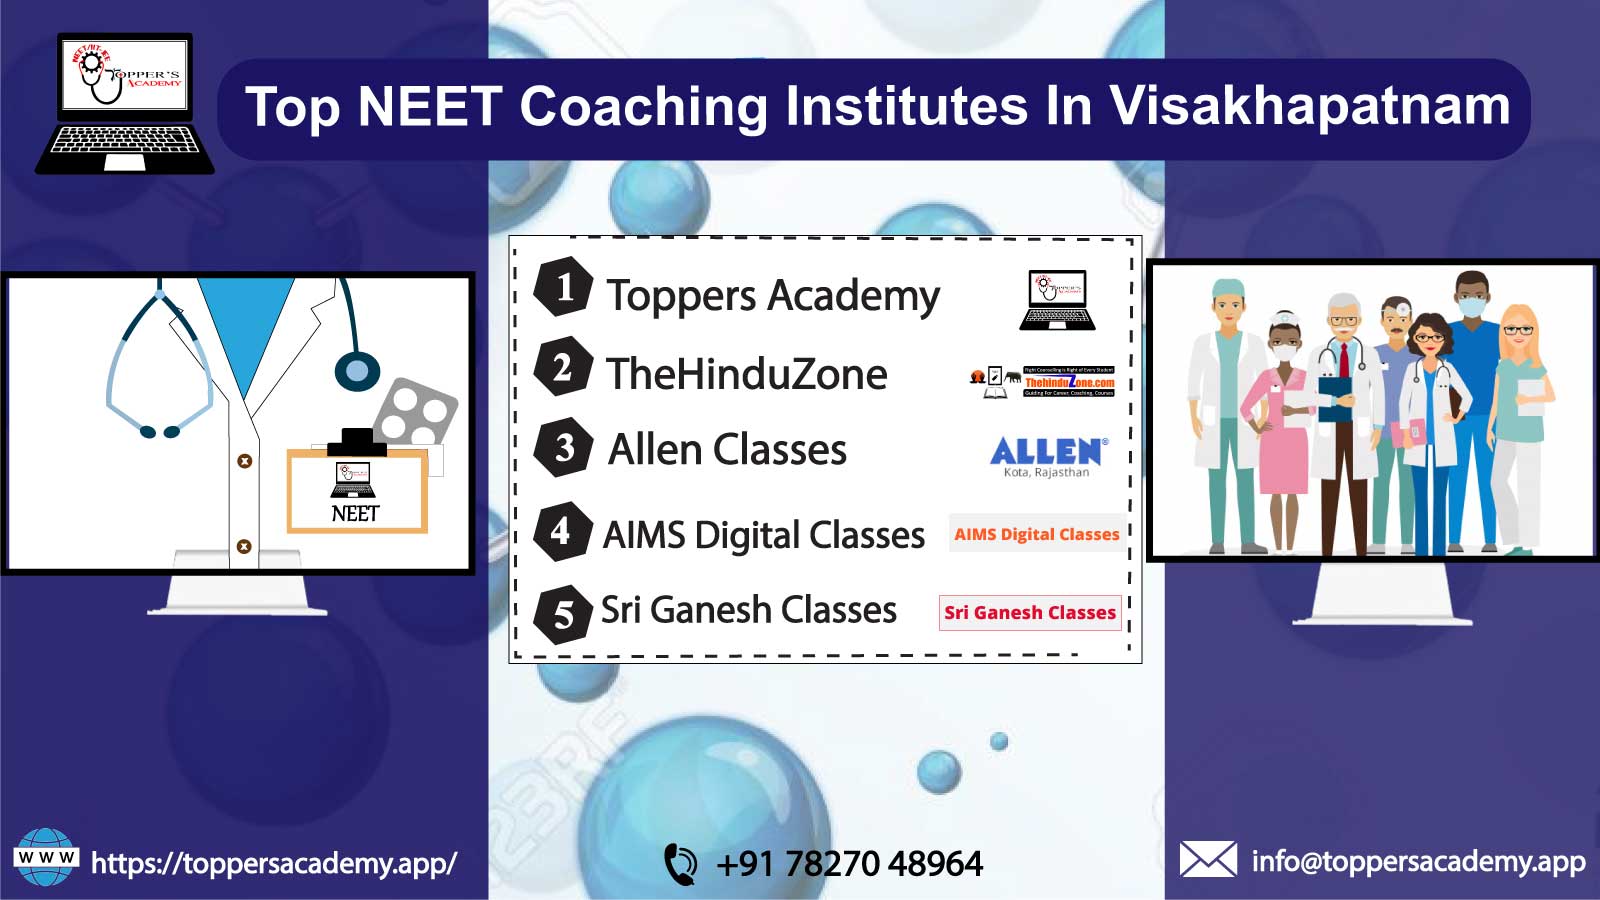 List Of The Top 10 Coaching Institute In Visakhapatnam